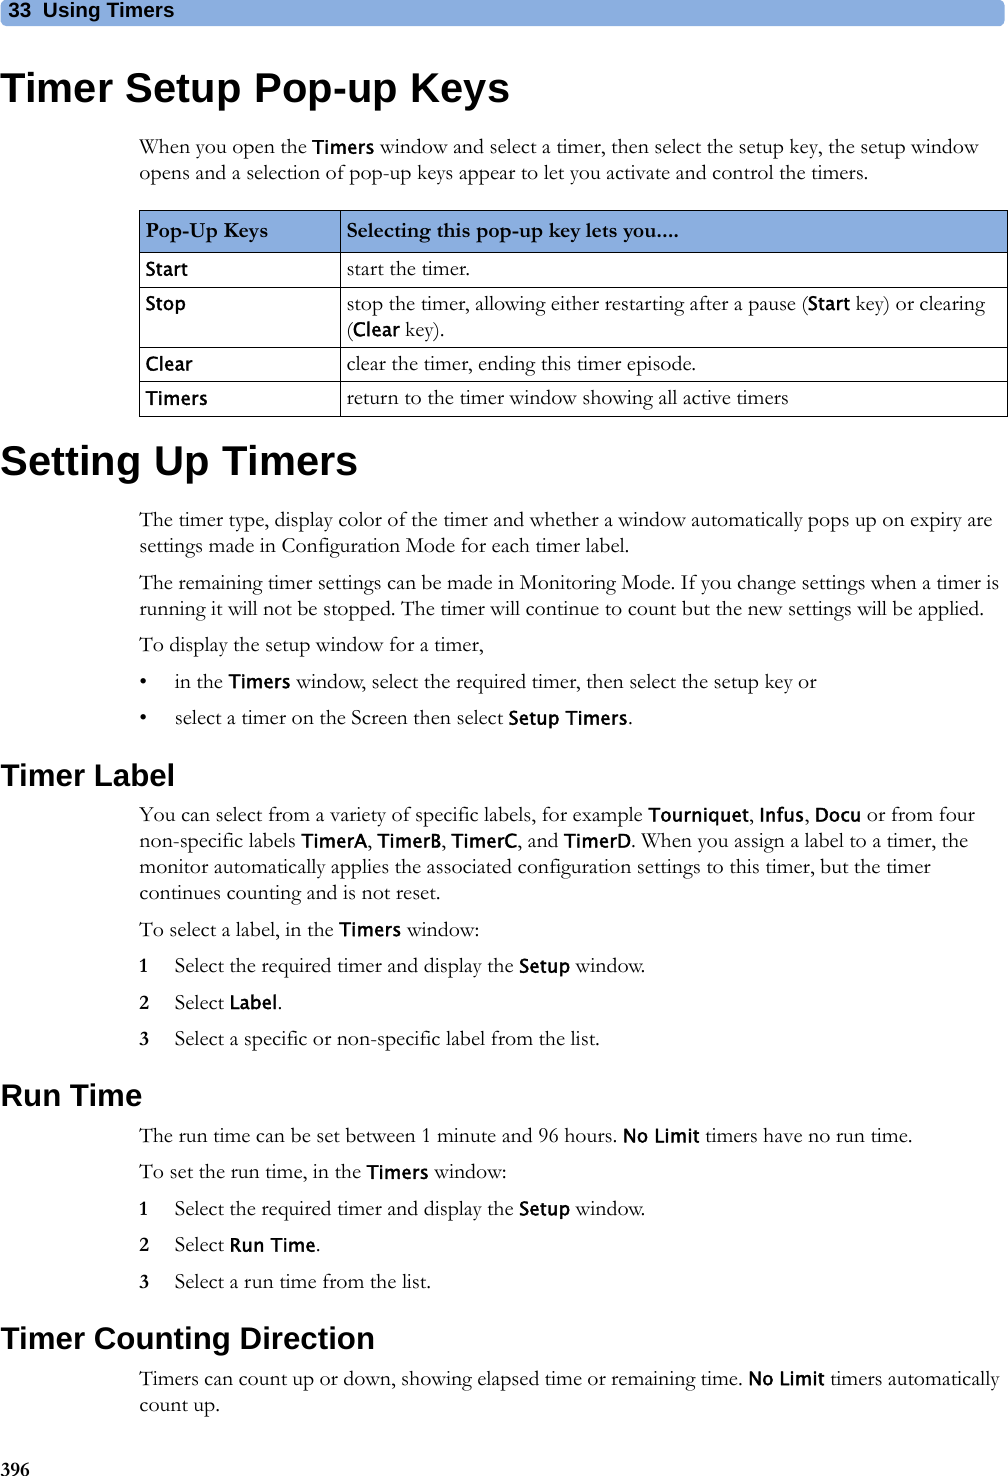 33 Using Timers396Timer Setup Pop-up KeysWhen you open the Timers window and select a timer, then select the setup key, the setup window opens and a selection of pop-up keys appear to let you activate and control the timers.Setting Up TimersThe timer type, display color of the timer and whether a window automatically pops up on expiry are settings made in Configuration Mode for each timer label.The remaining timer settings can be made in Monitoring Mode. If you change settings when a timer is running it will not be stopped. The timer will continue to count but the new settings will be applied.To display the setup window for a timer,•in the Timers window, select the required timer, then select the setup key or• select a timer on the Screen then select Setup Timers.Timer LabelYou can select from a variety of specific labels, for example Tourniquet, Infus, Docu or from four non-specific labels TimerA, TimerB, TimerC, and TimerD. When you assign a label to a timer, the monitor automatically applies the associated configuration settings to this timer, but the timer continues counting and is not reset.To select a label, in the Timers window:1Select the required timer and display the Setup window.2Select Label.3Select a specific or non-specific label from the list.Run TimeThe run time can be set between 1 minute and 96 hours. No Limit timers have no run time.To set the run time, in the Timers window:1Select the required timer and display the Setup window.2Select Run Time.3Select a run time from the list.Timer Counting DirectionTimers can count up or down, showing elapsed time or remaining time. No Limit timers automatically count up.Pop-Up Keys Selecting this pop-up key lets you....Start start the timer.Stop stop the timer, allowing either restarting after a pause (Start key) or clearing (Clear key).Clear clear the timer, ending this timer episode.Timers return to the timer window showing all active timers